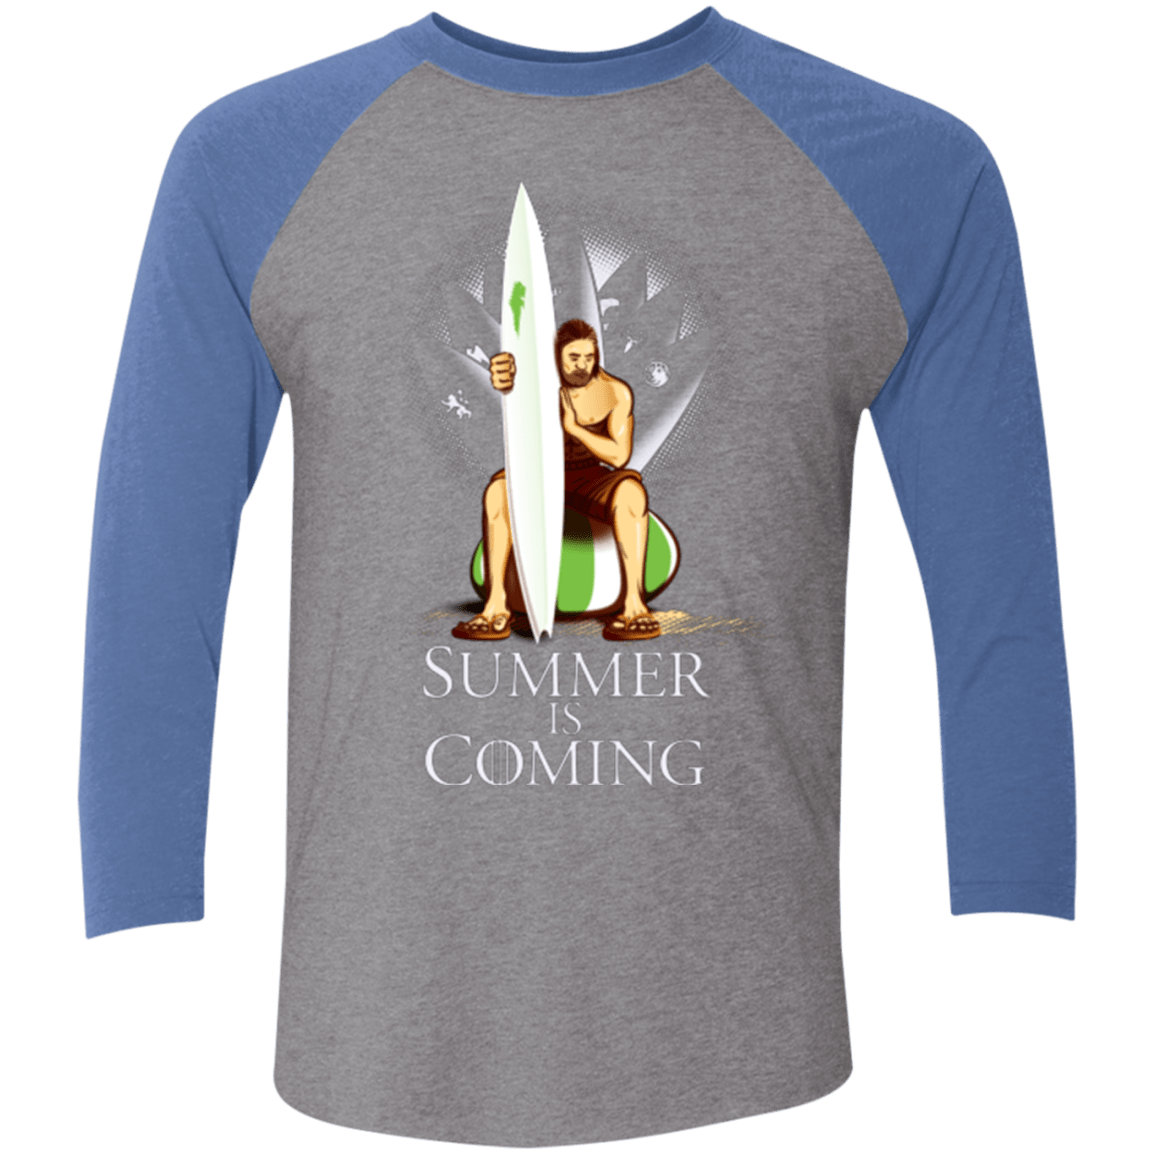 Summer is Coming Men's Triblend 3/4 Sleeve